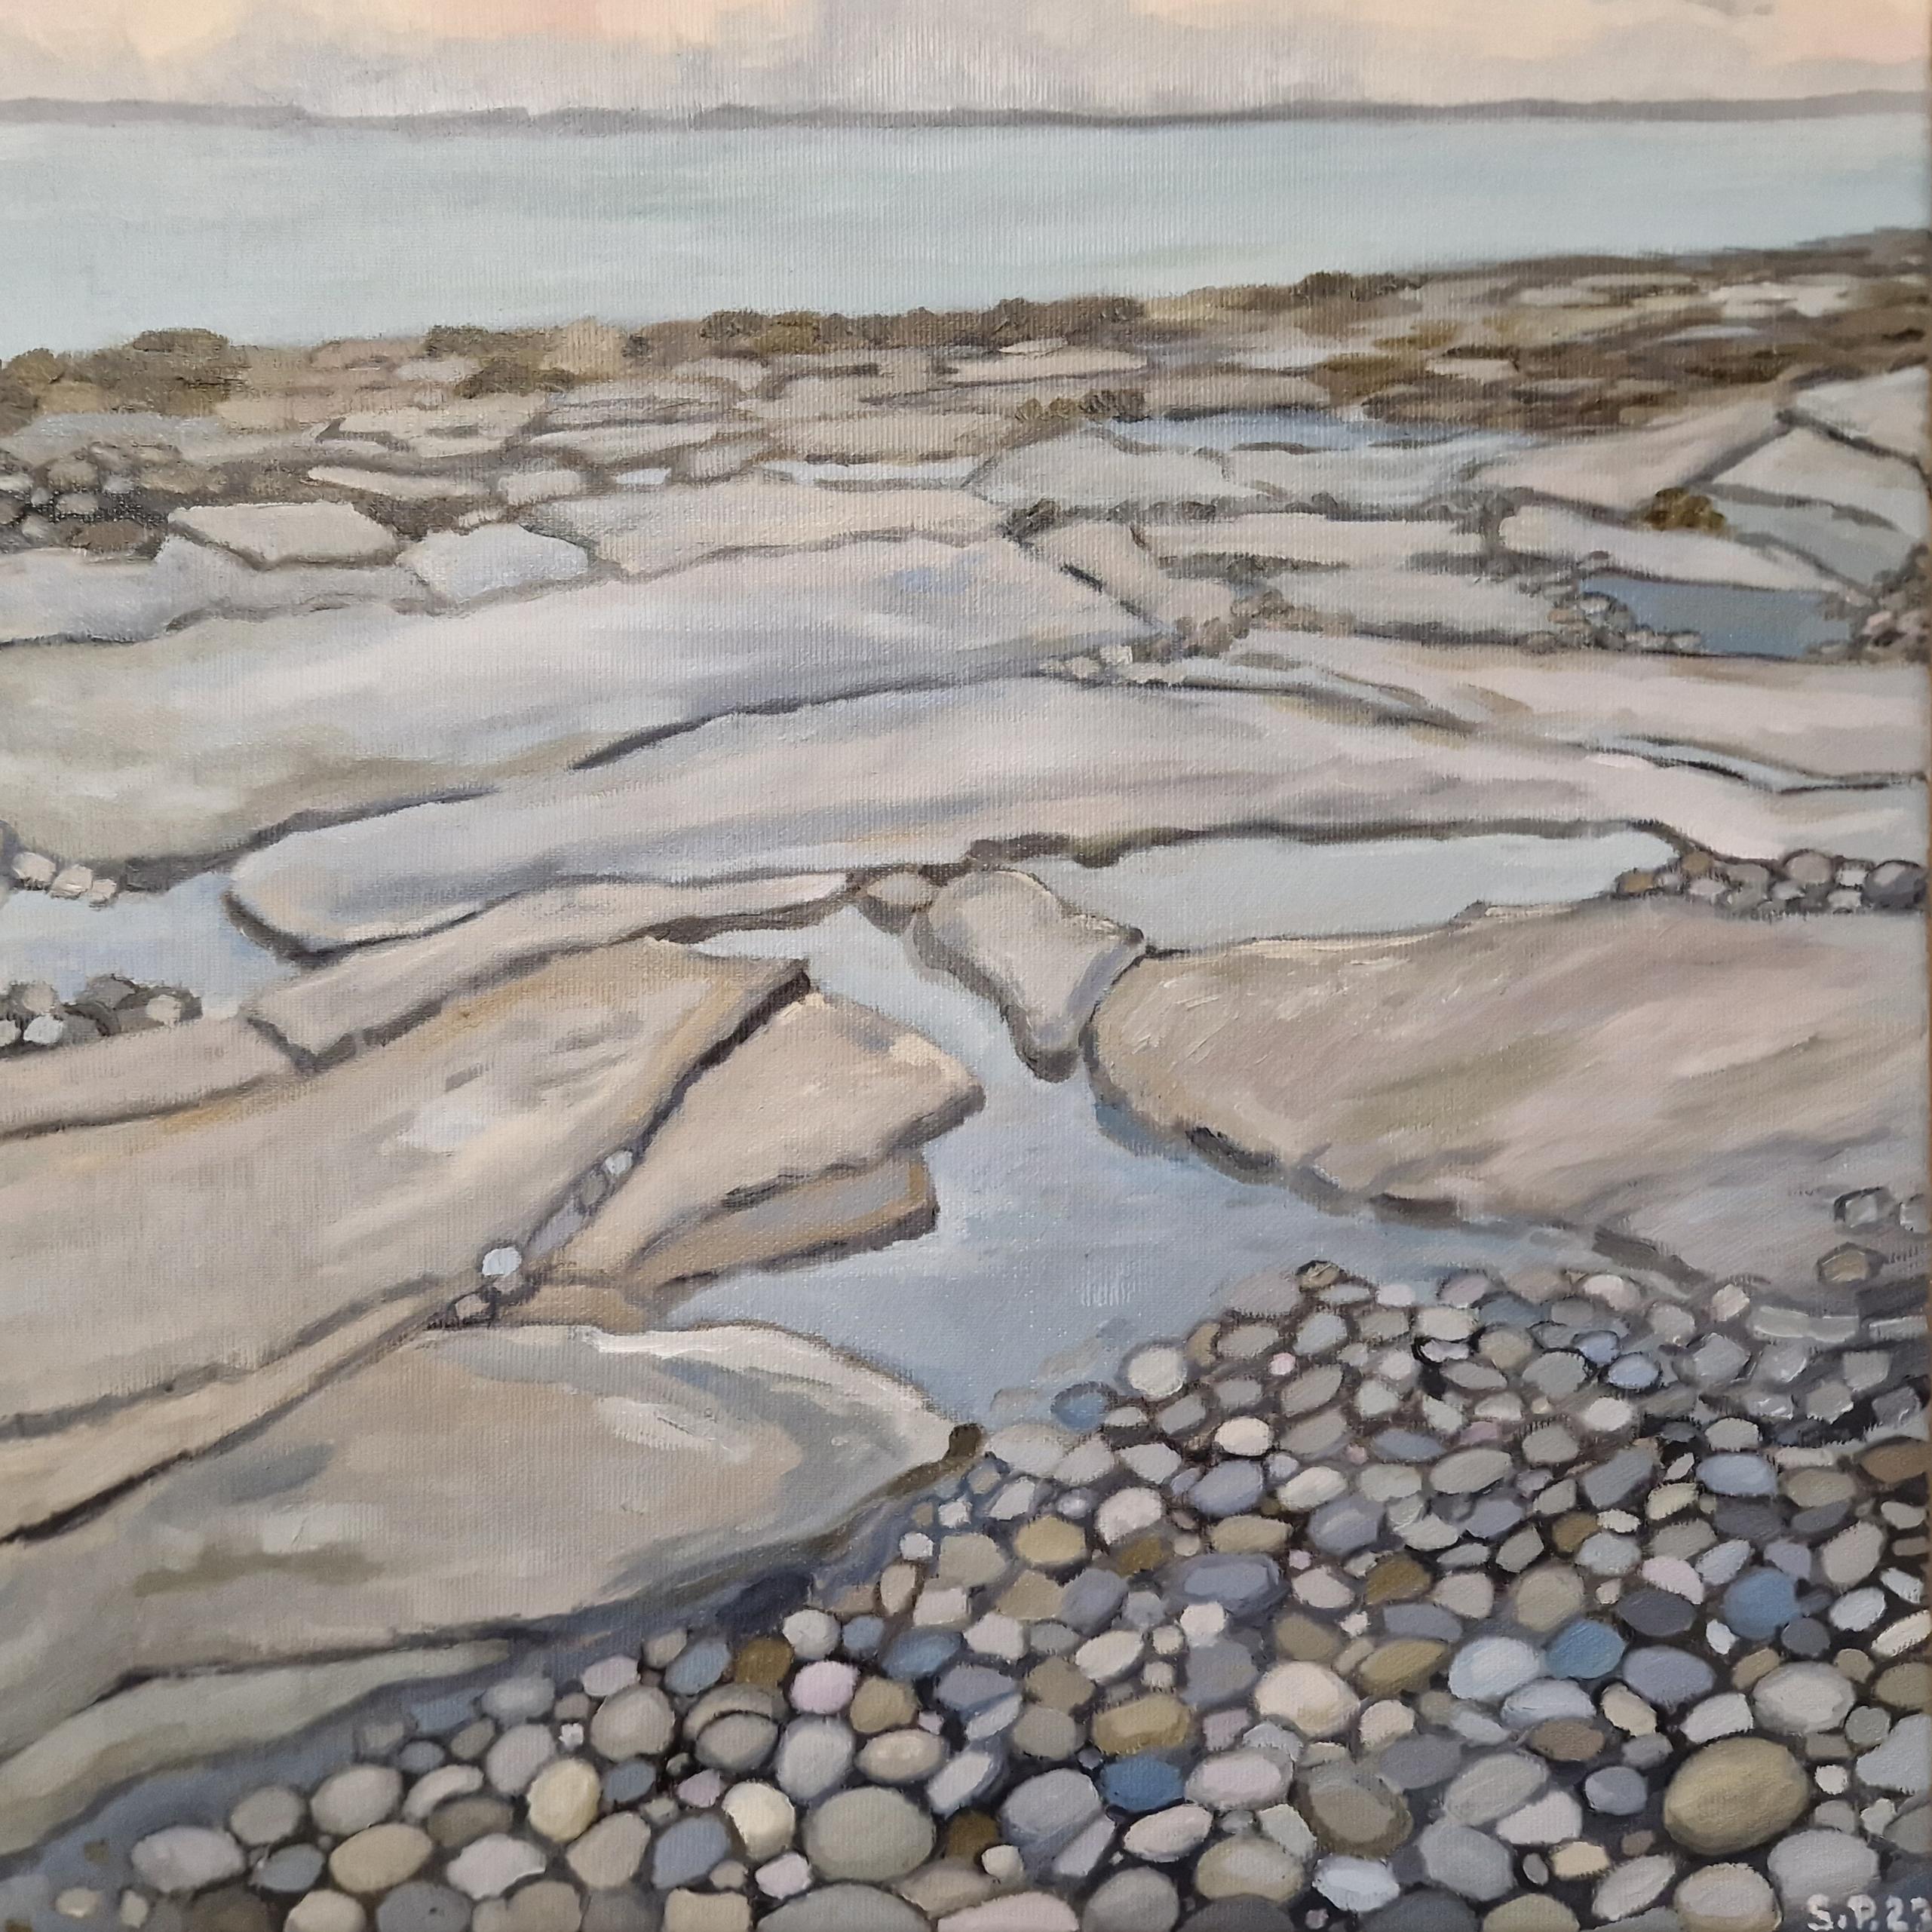 The painting 'Rock Pools'.